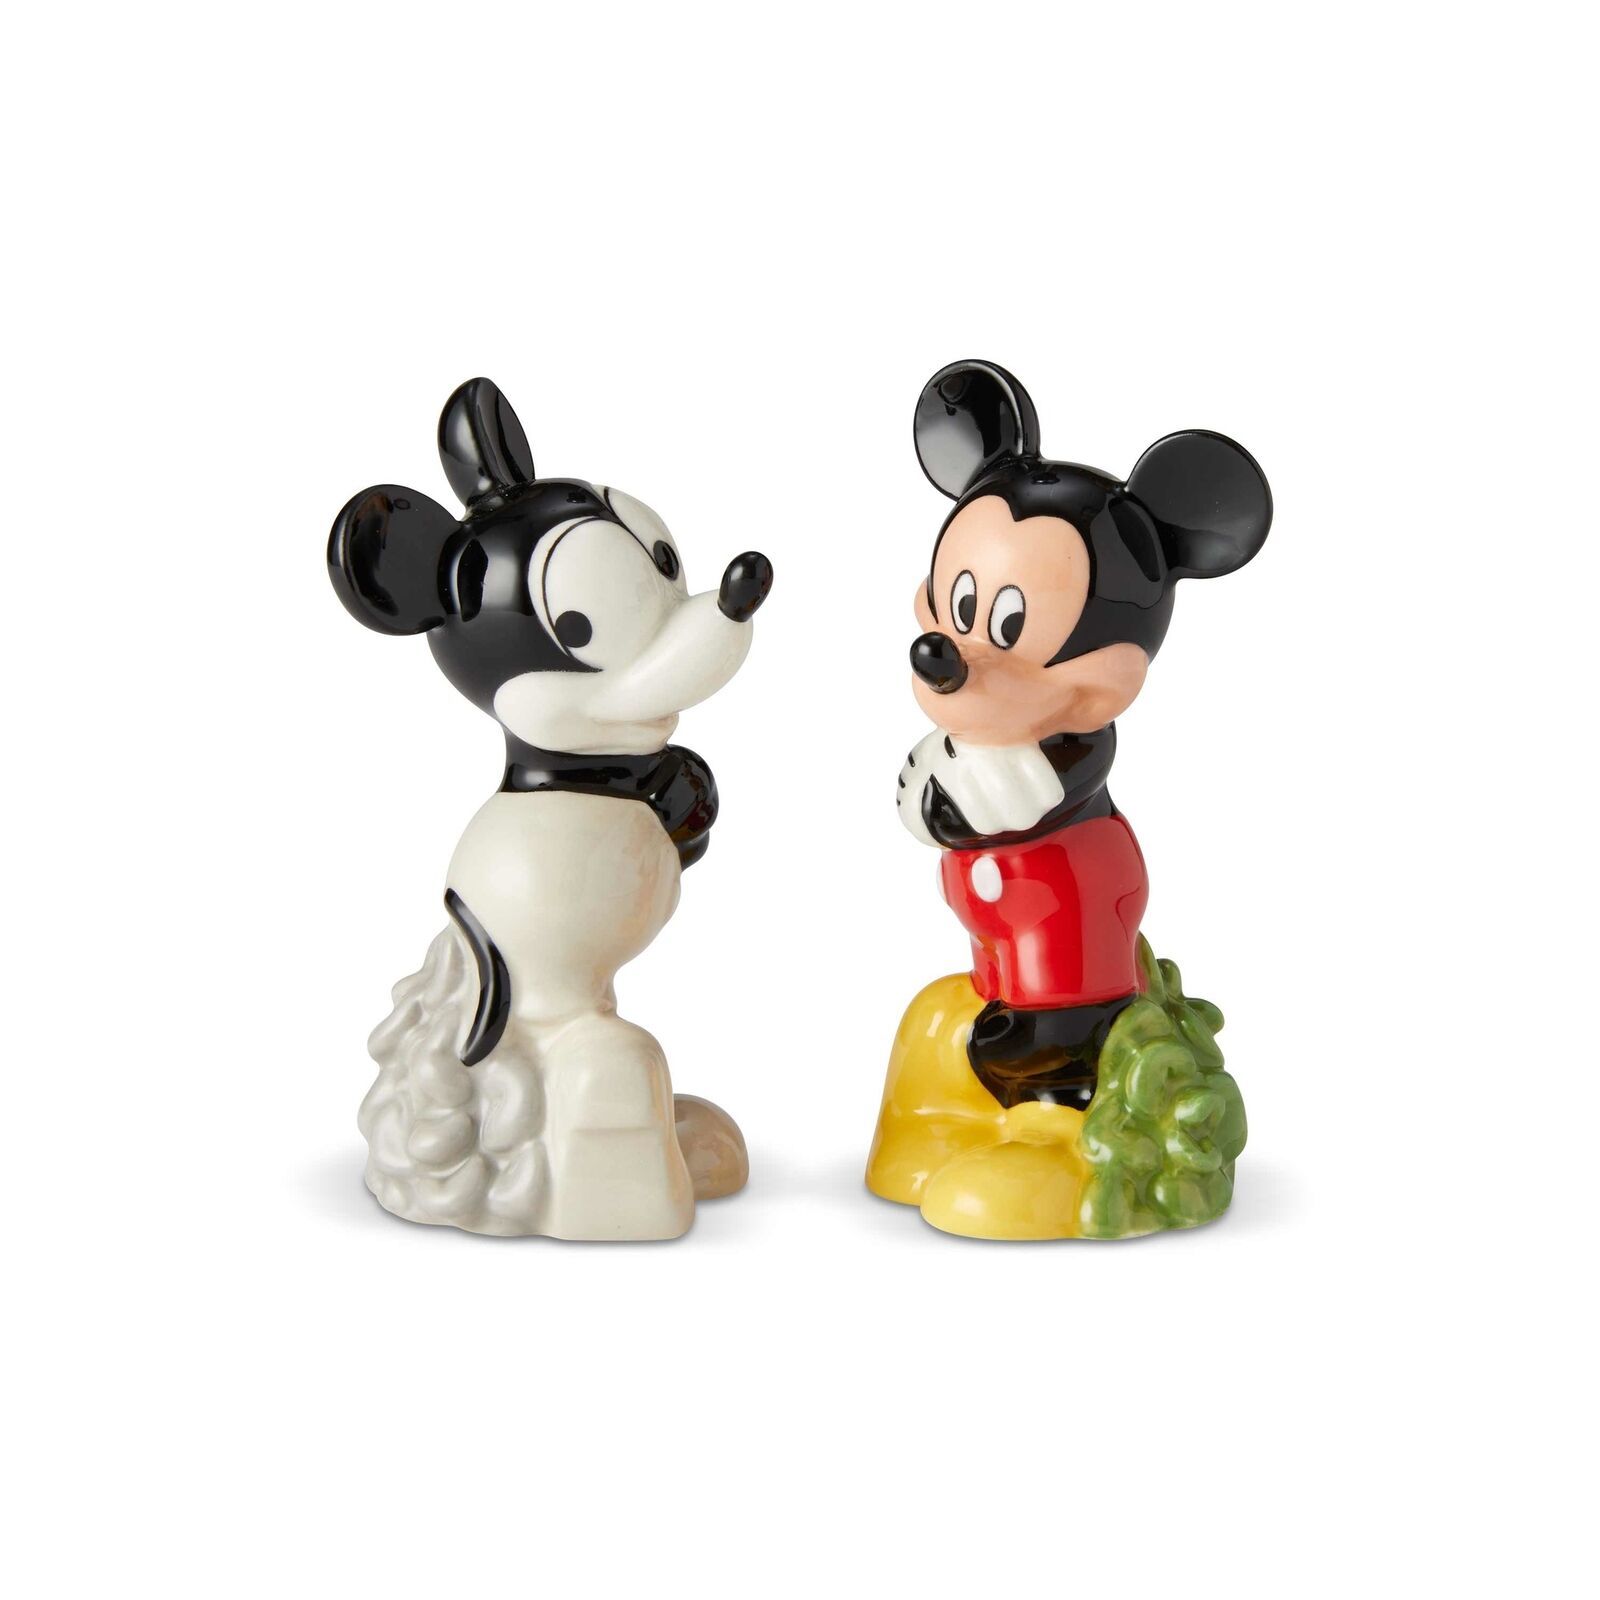 Enesco Disney Ceramics Mickey Then and Now Salt & Pepper New with Box - $10.93